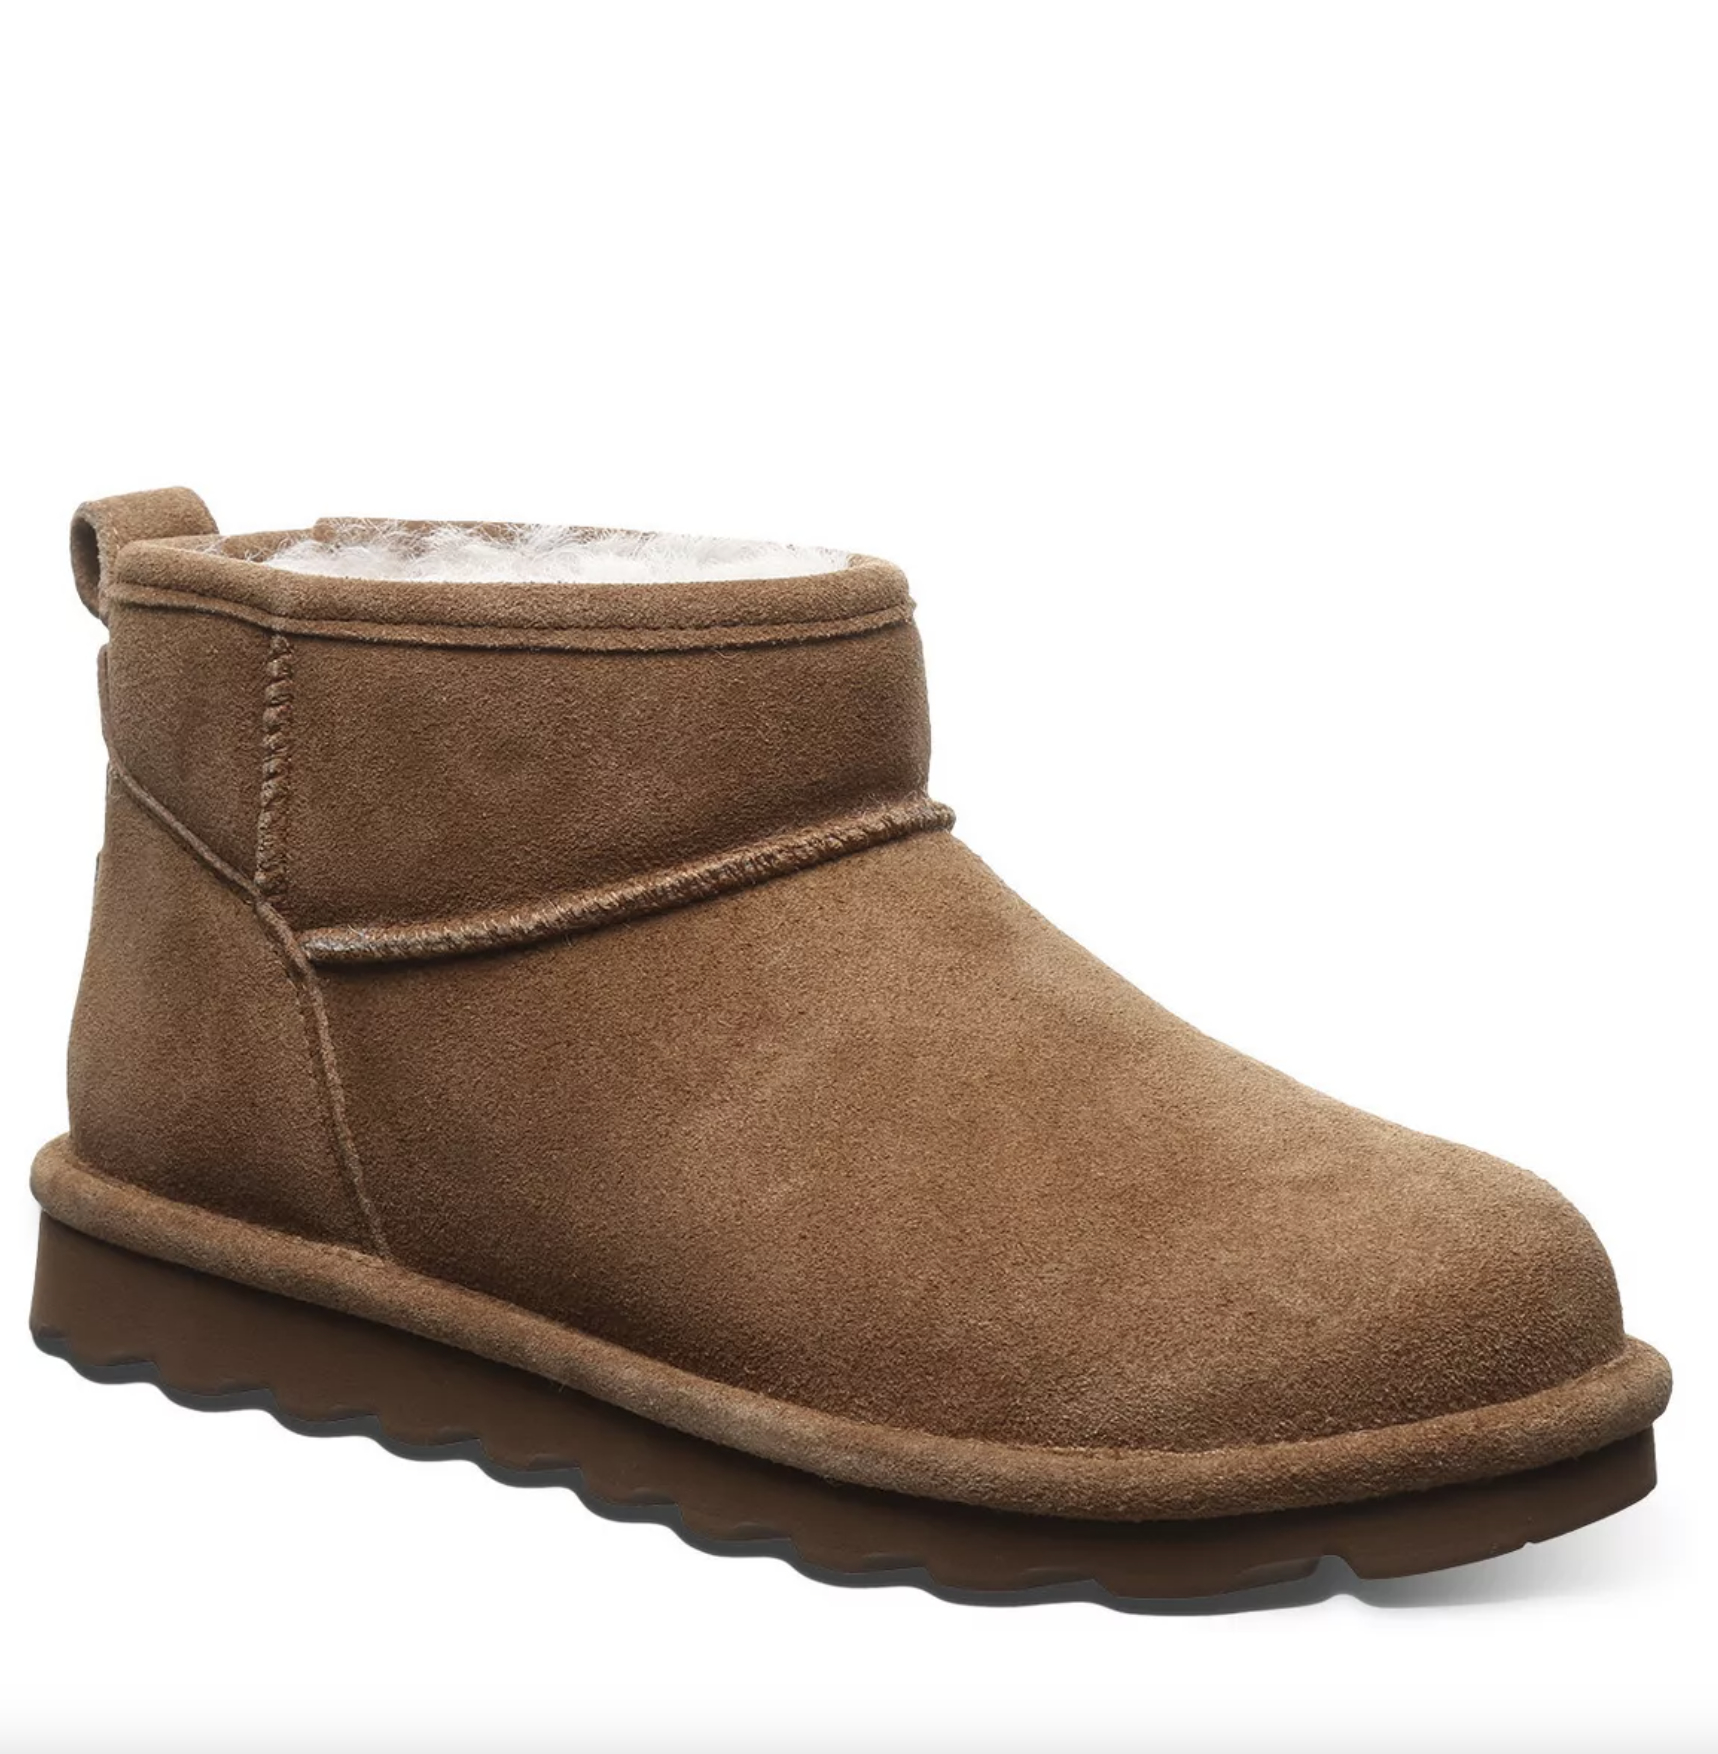 the fleece lined boots